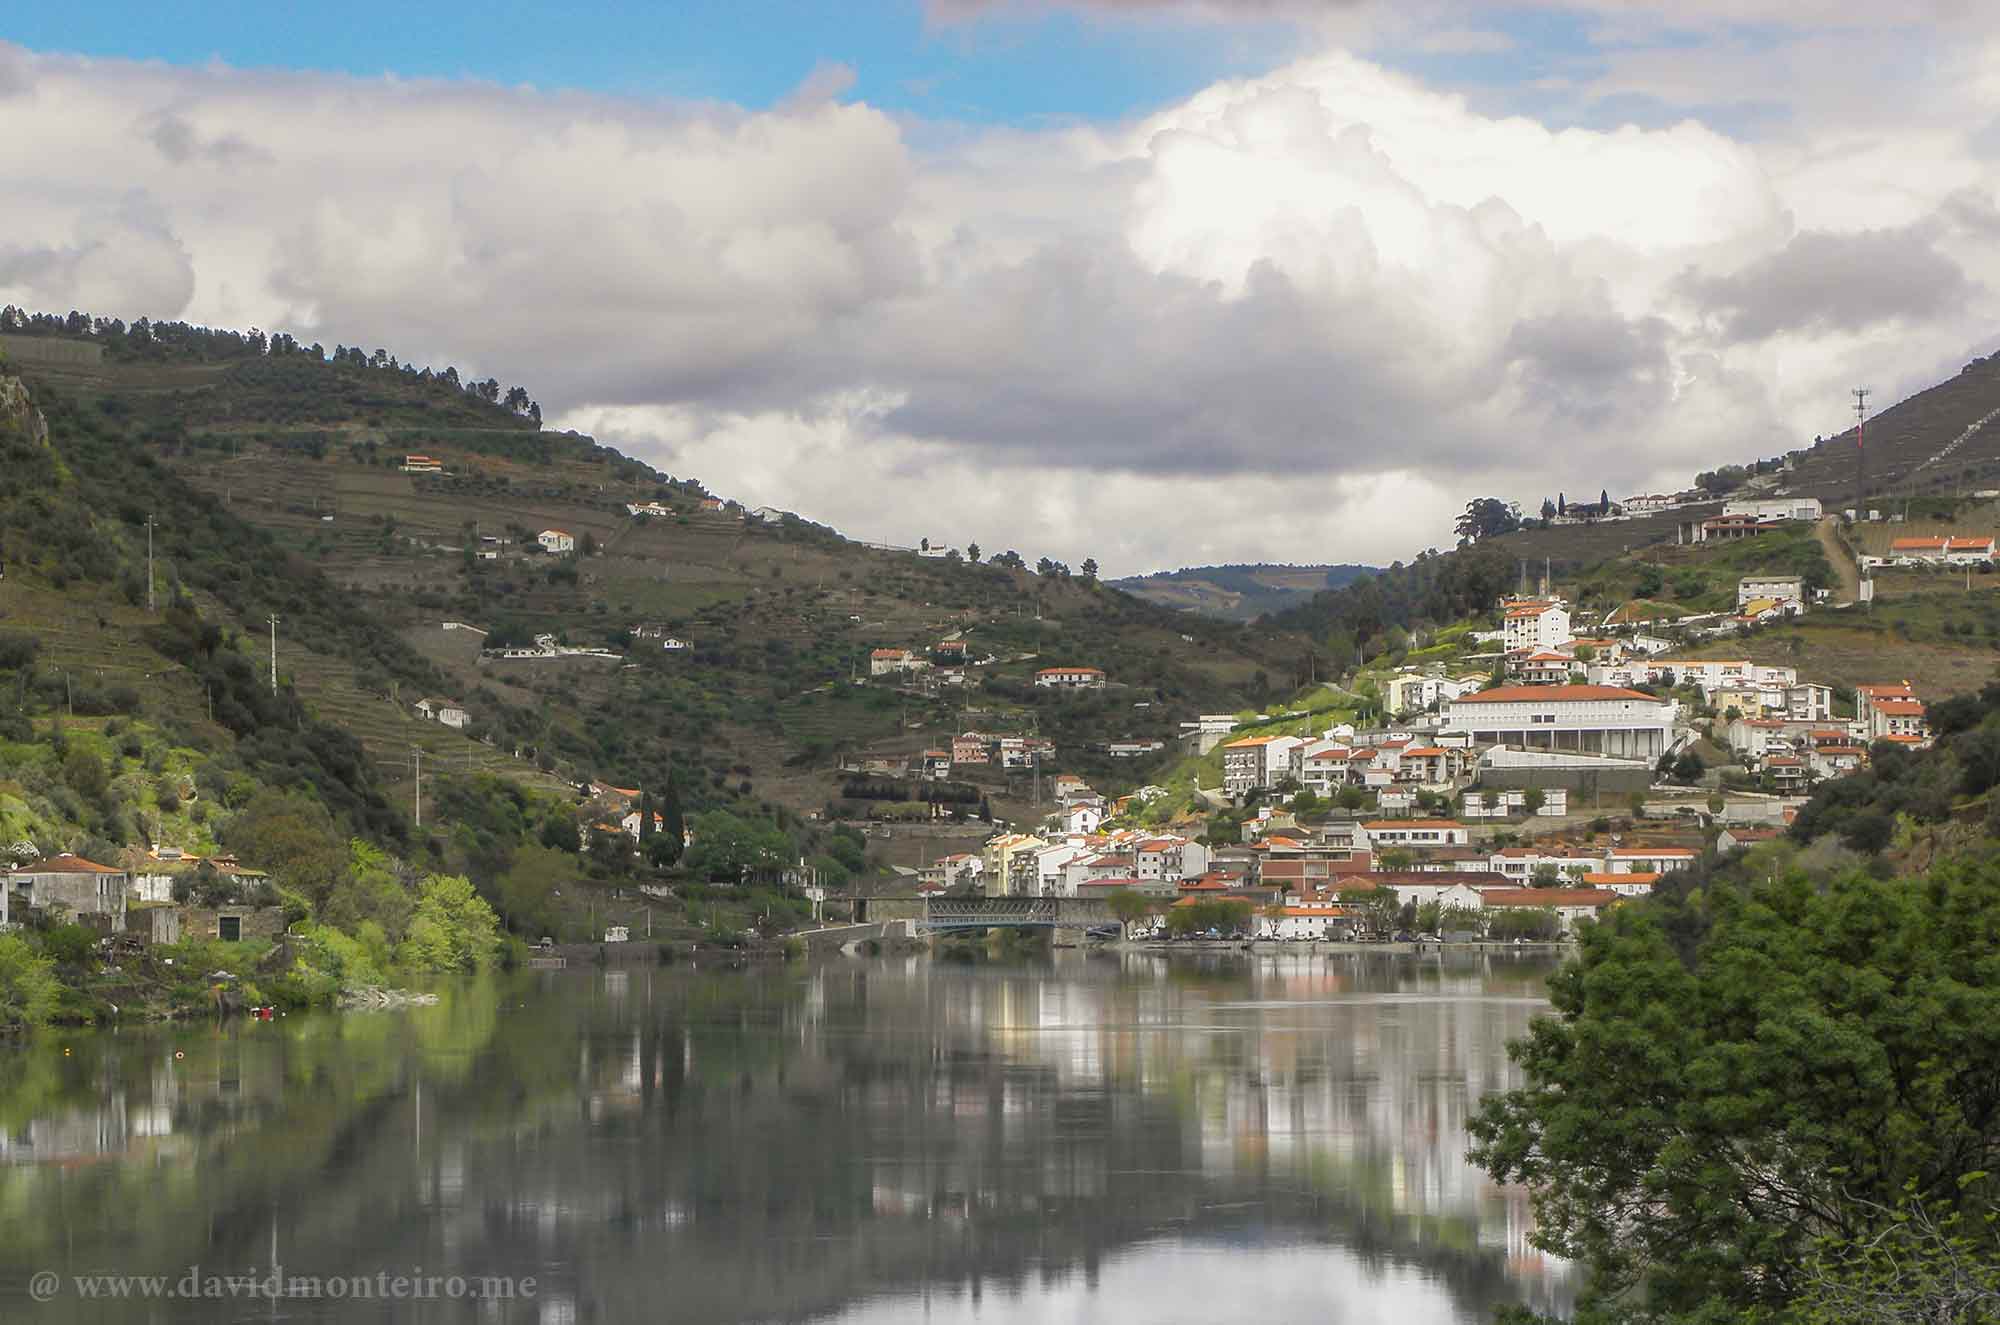 Pinhão, seen from a Rabelo boat ride, Douro Valley, Portugal